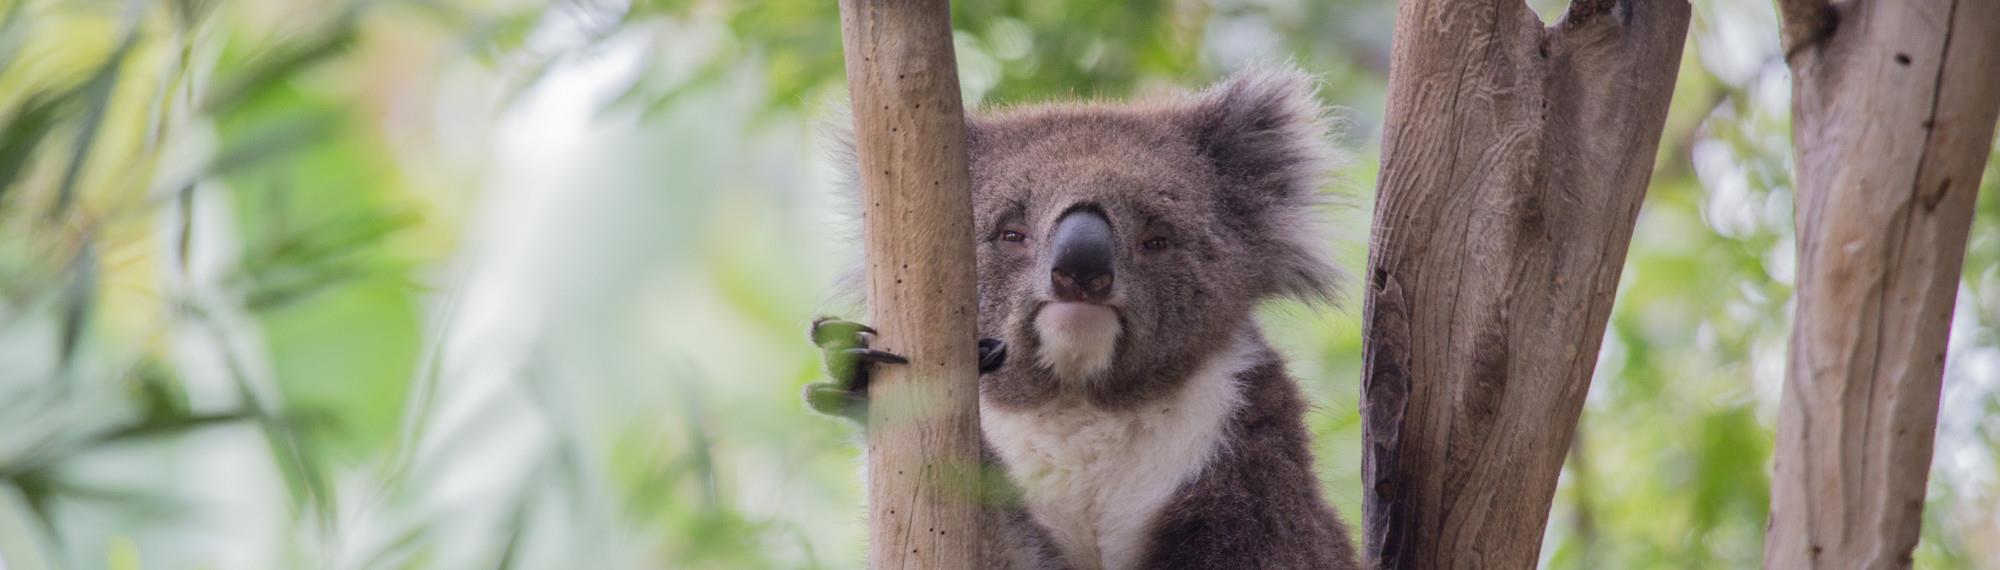 A Koala in a tree, holding onto a branch with claw and looking lazy.